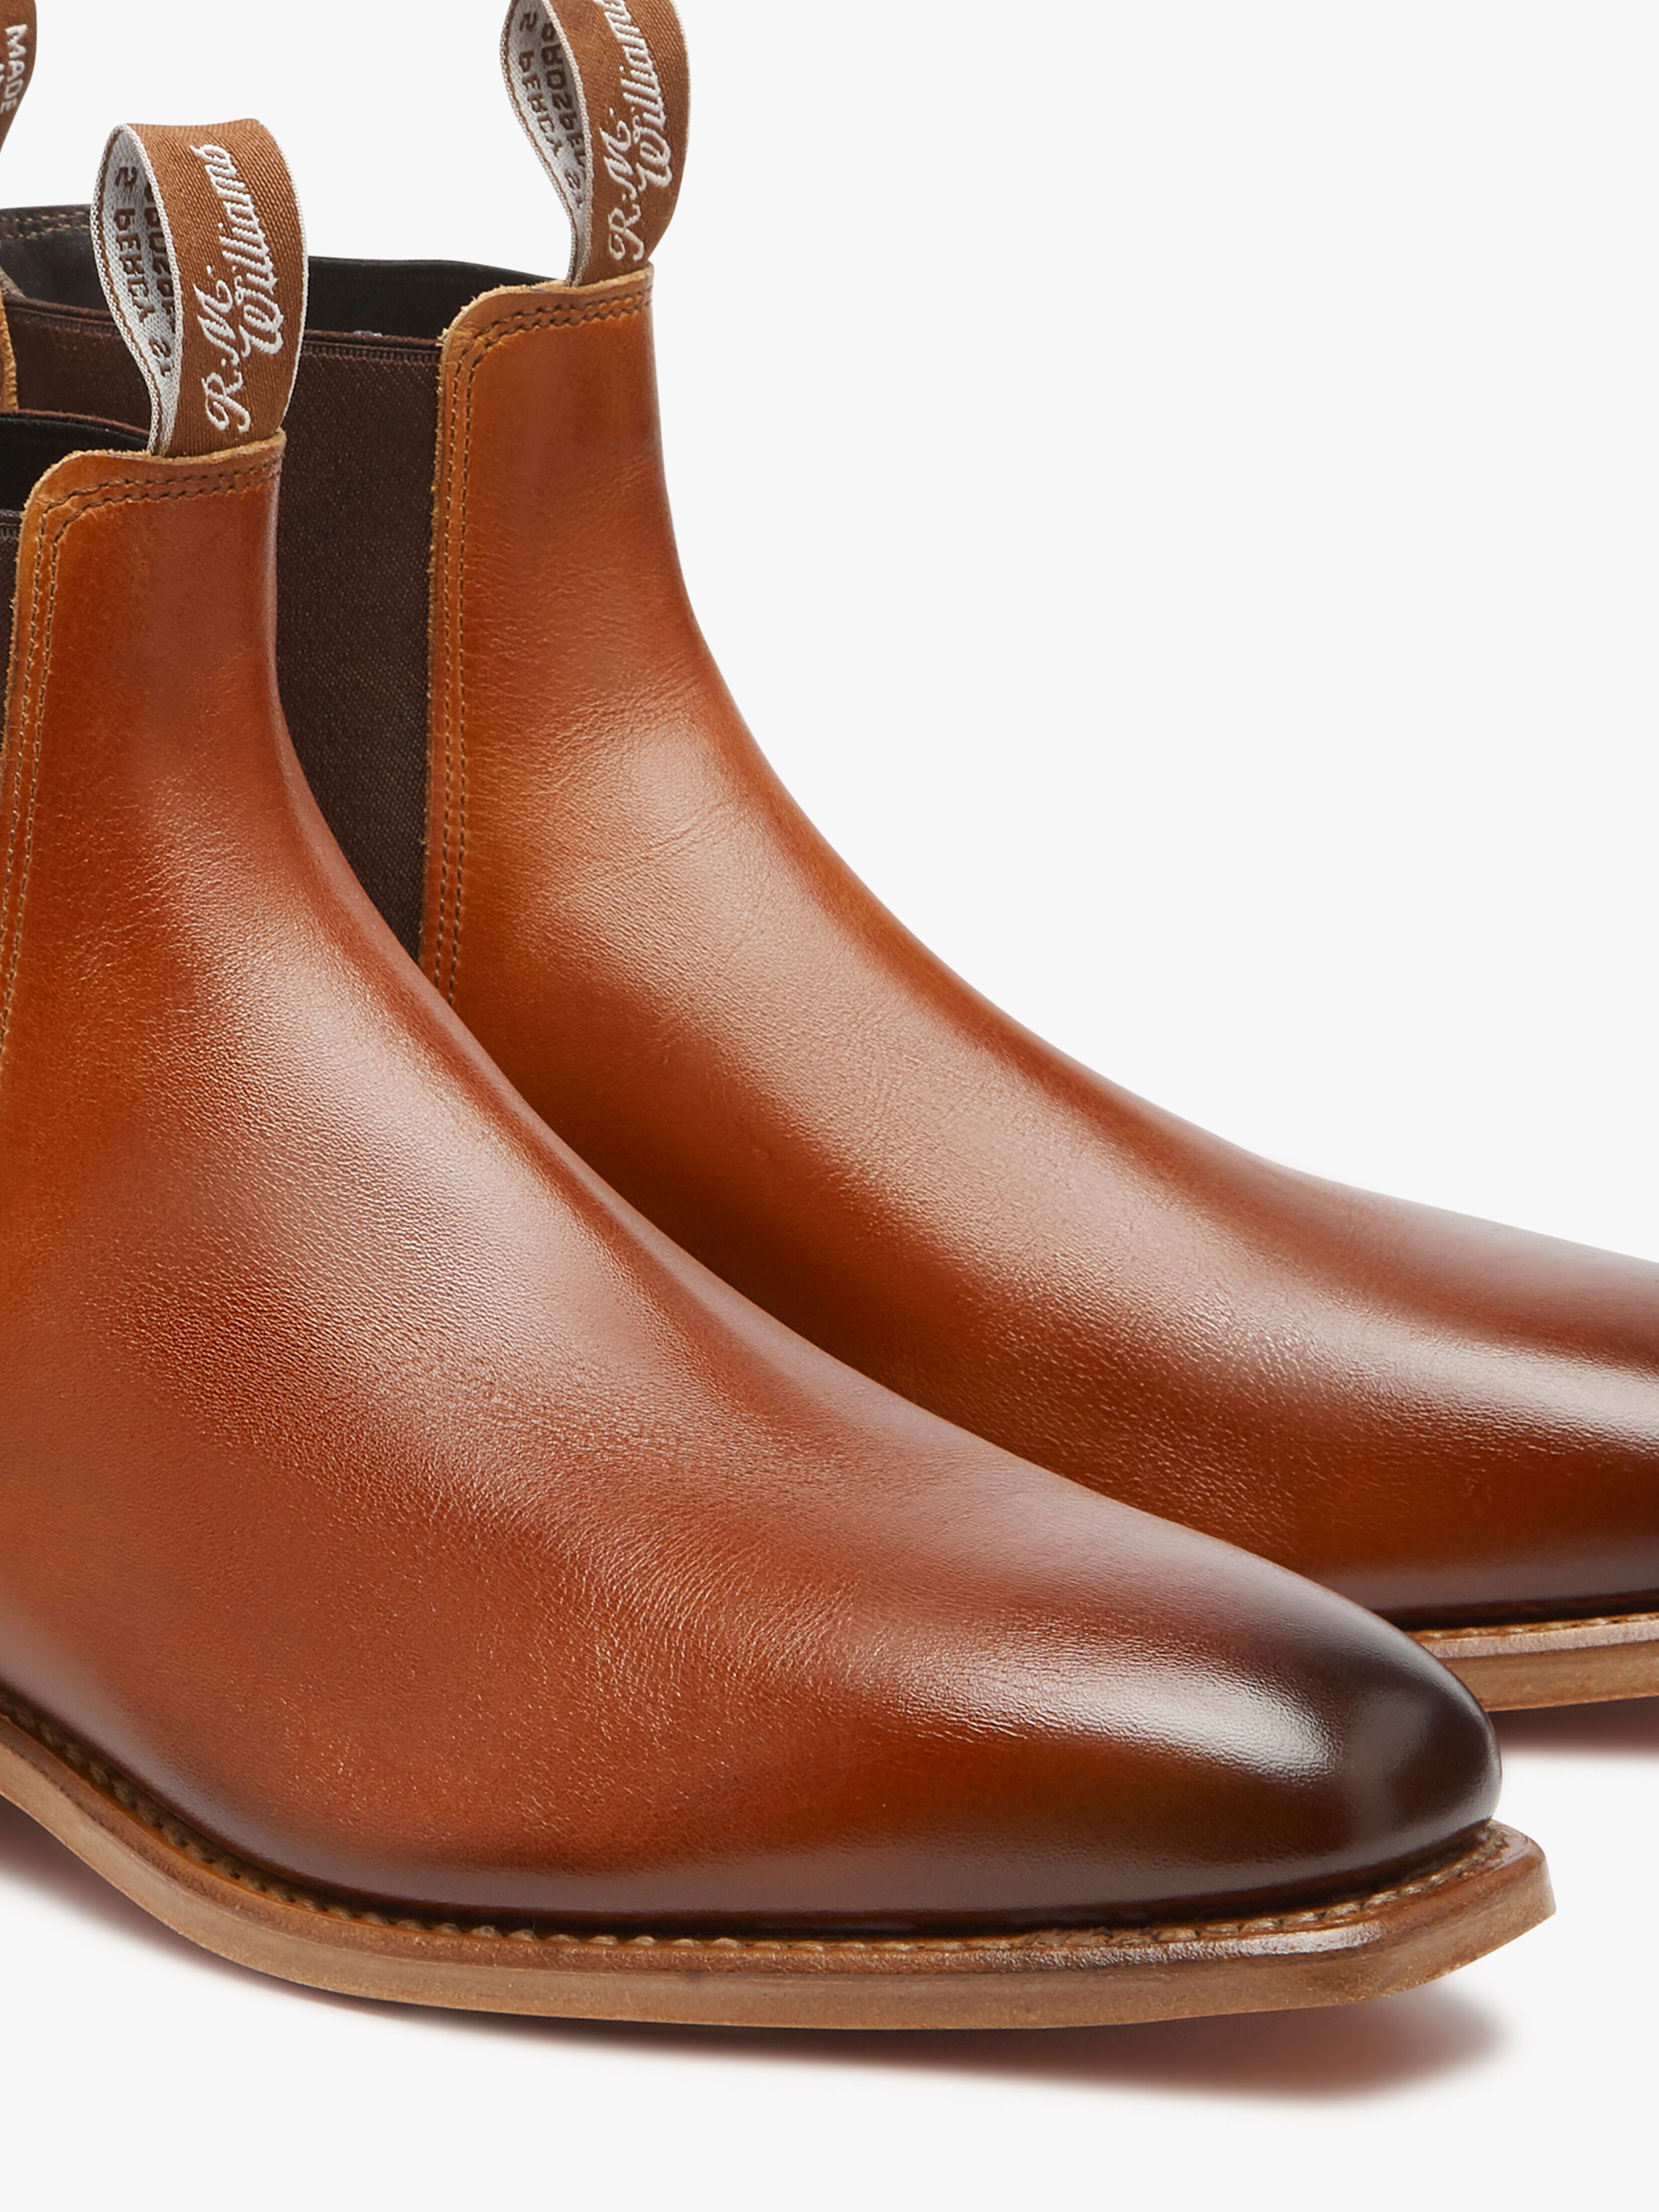 rm williams boots sale